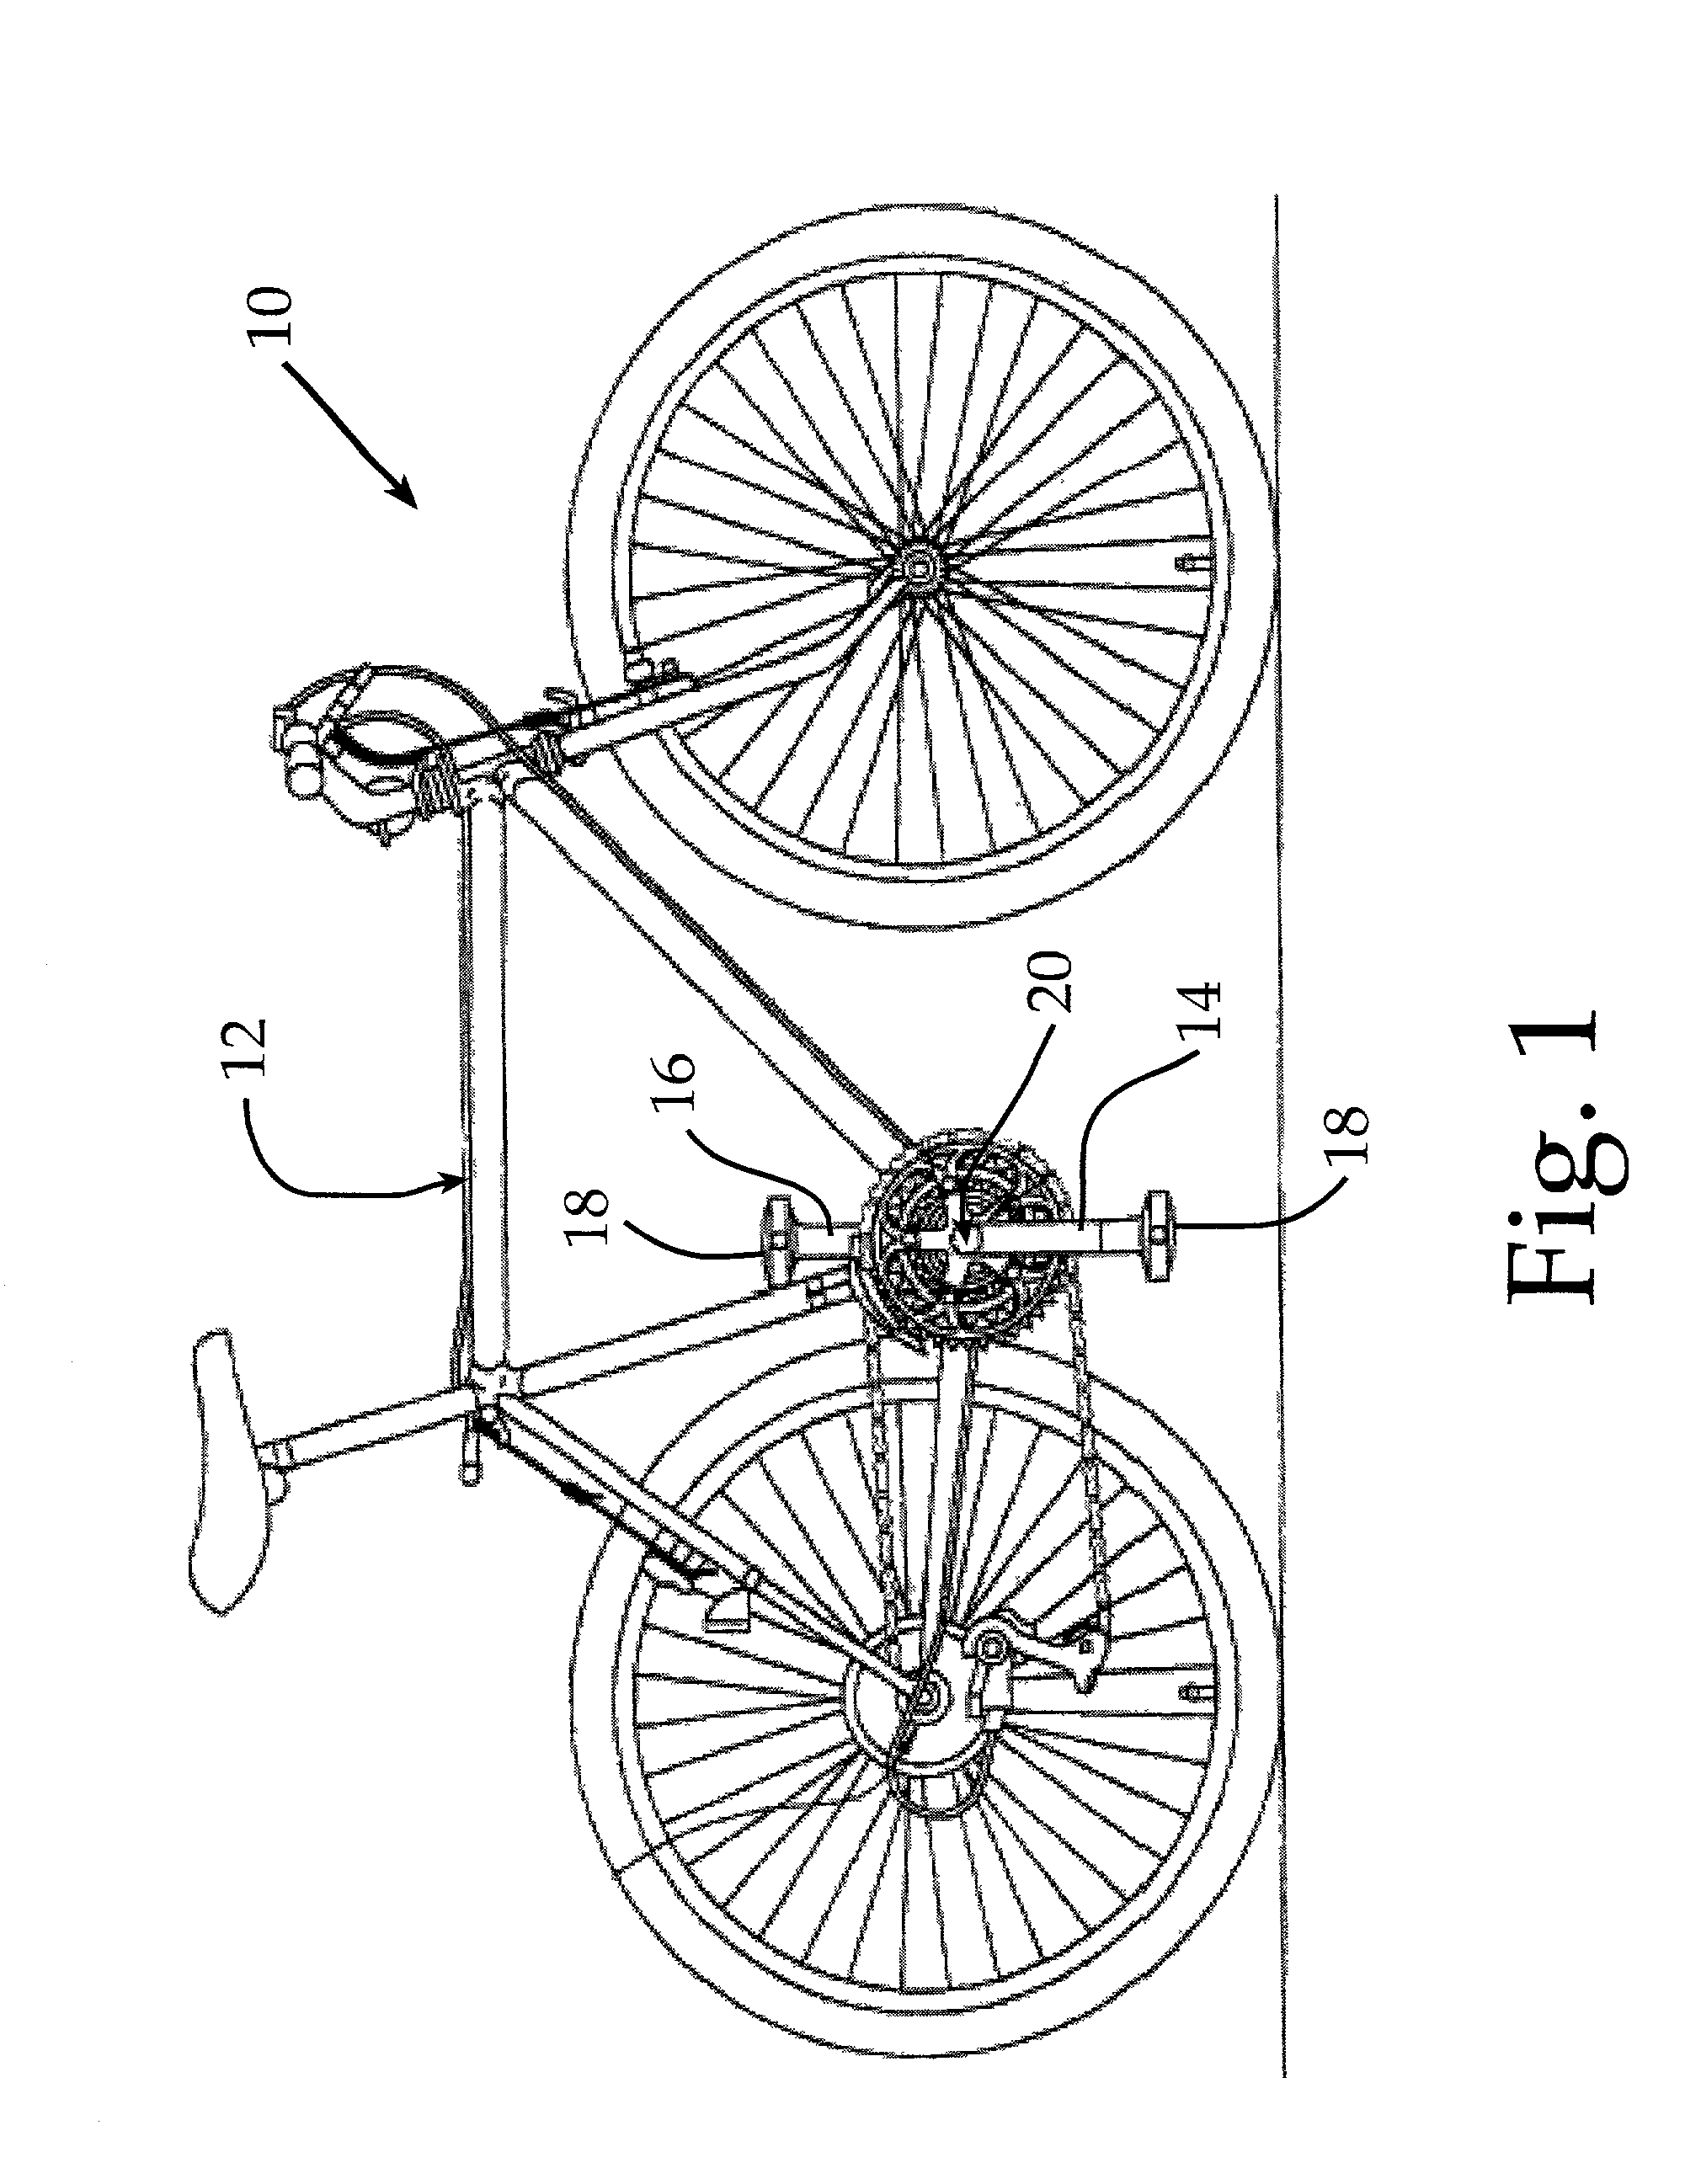 Bicycle crank axle bearing assembly